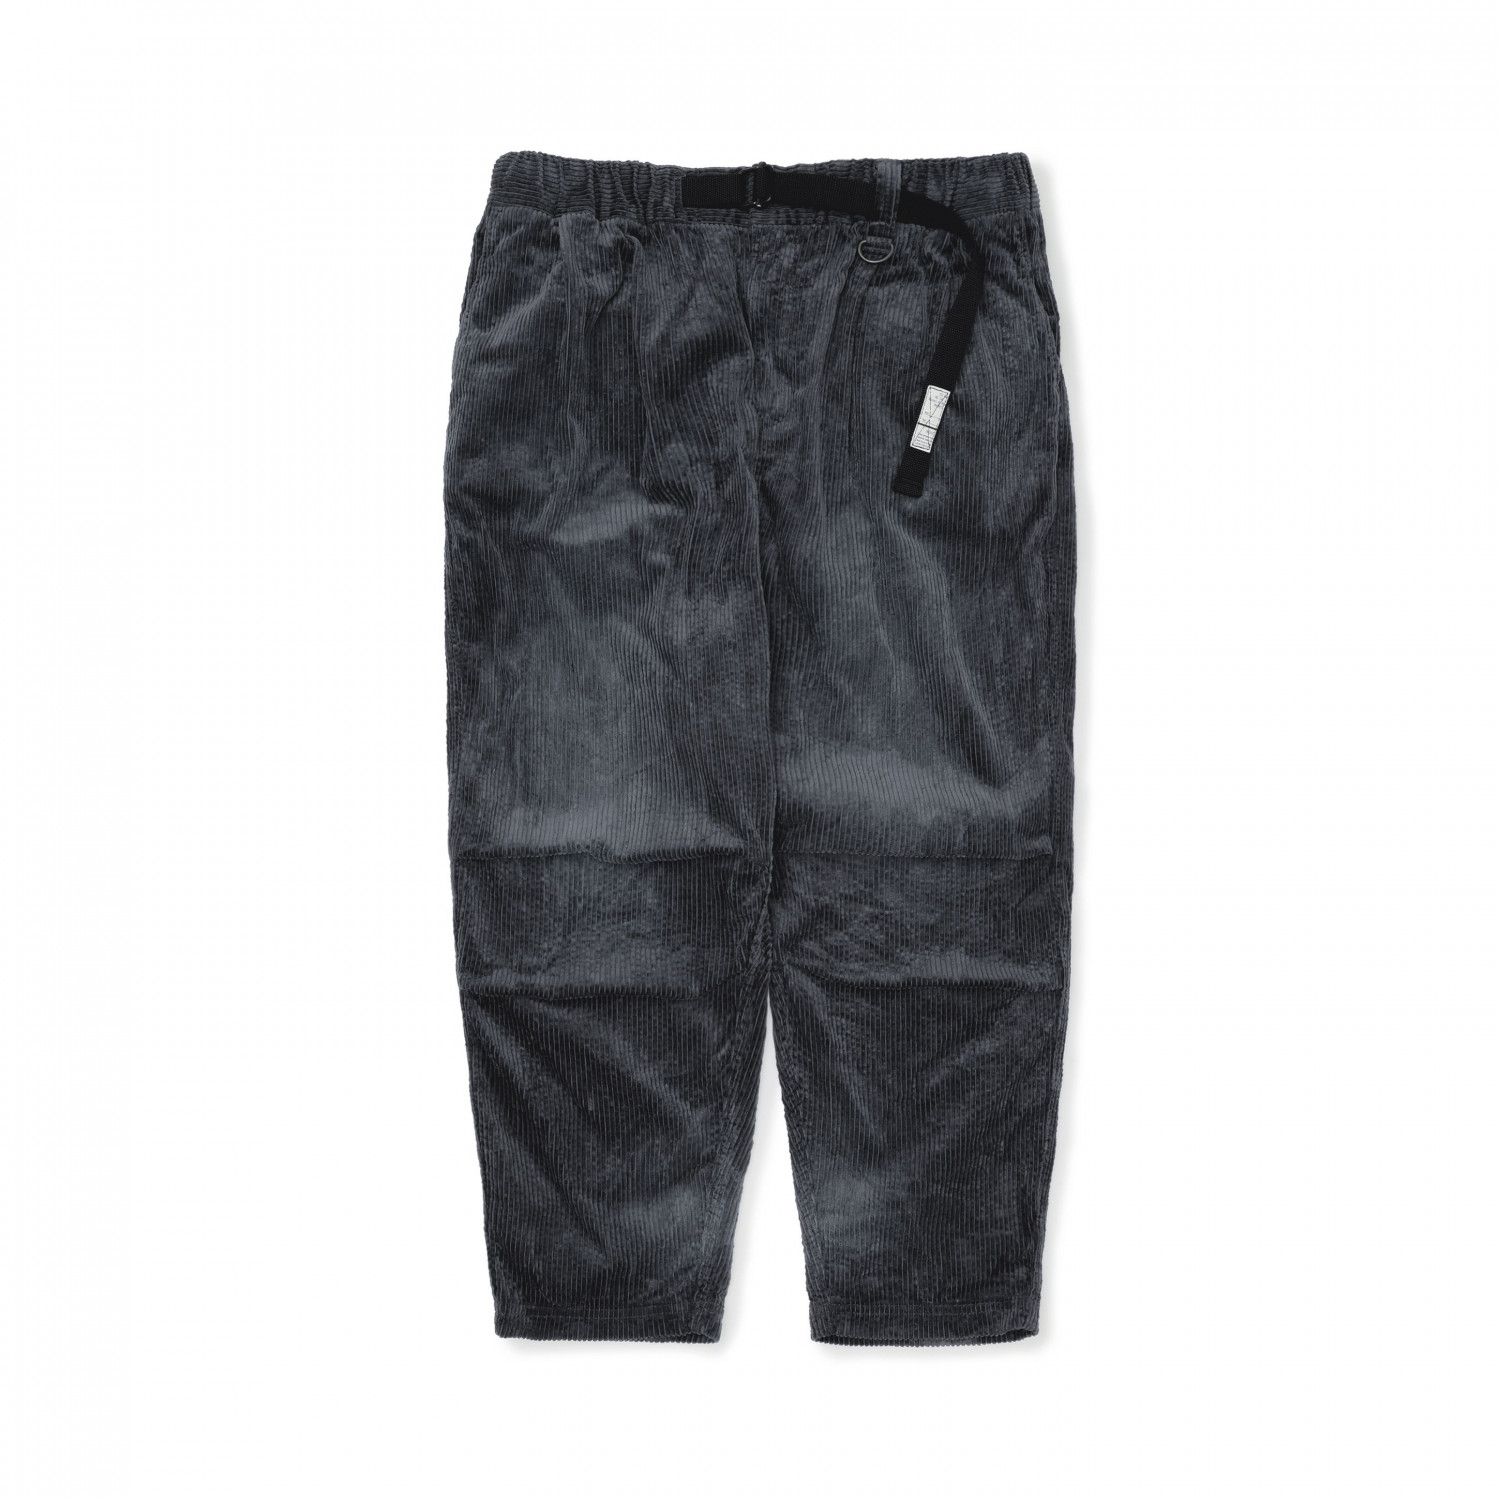 MADNESS HEAVY WASHED CORDUROY PANTS | MADNESS